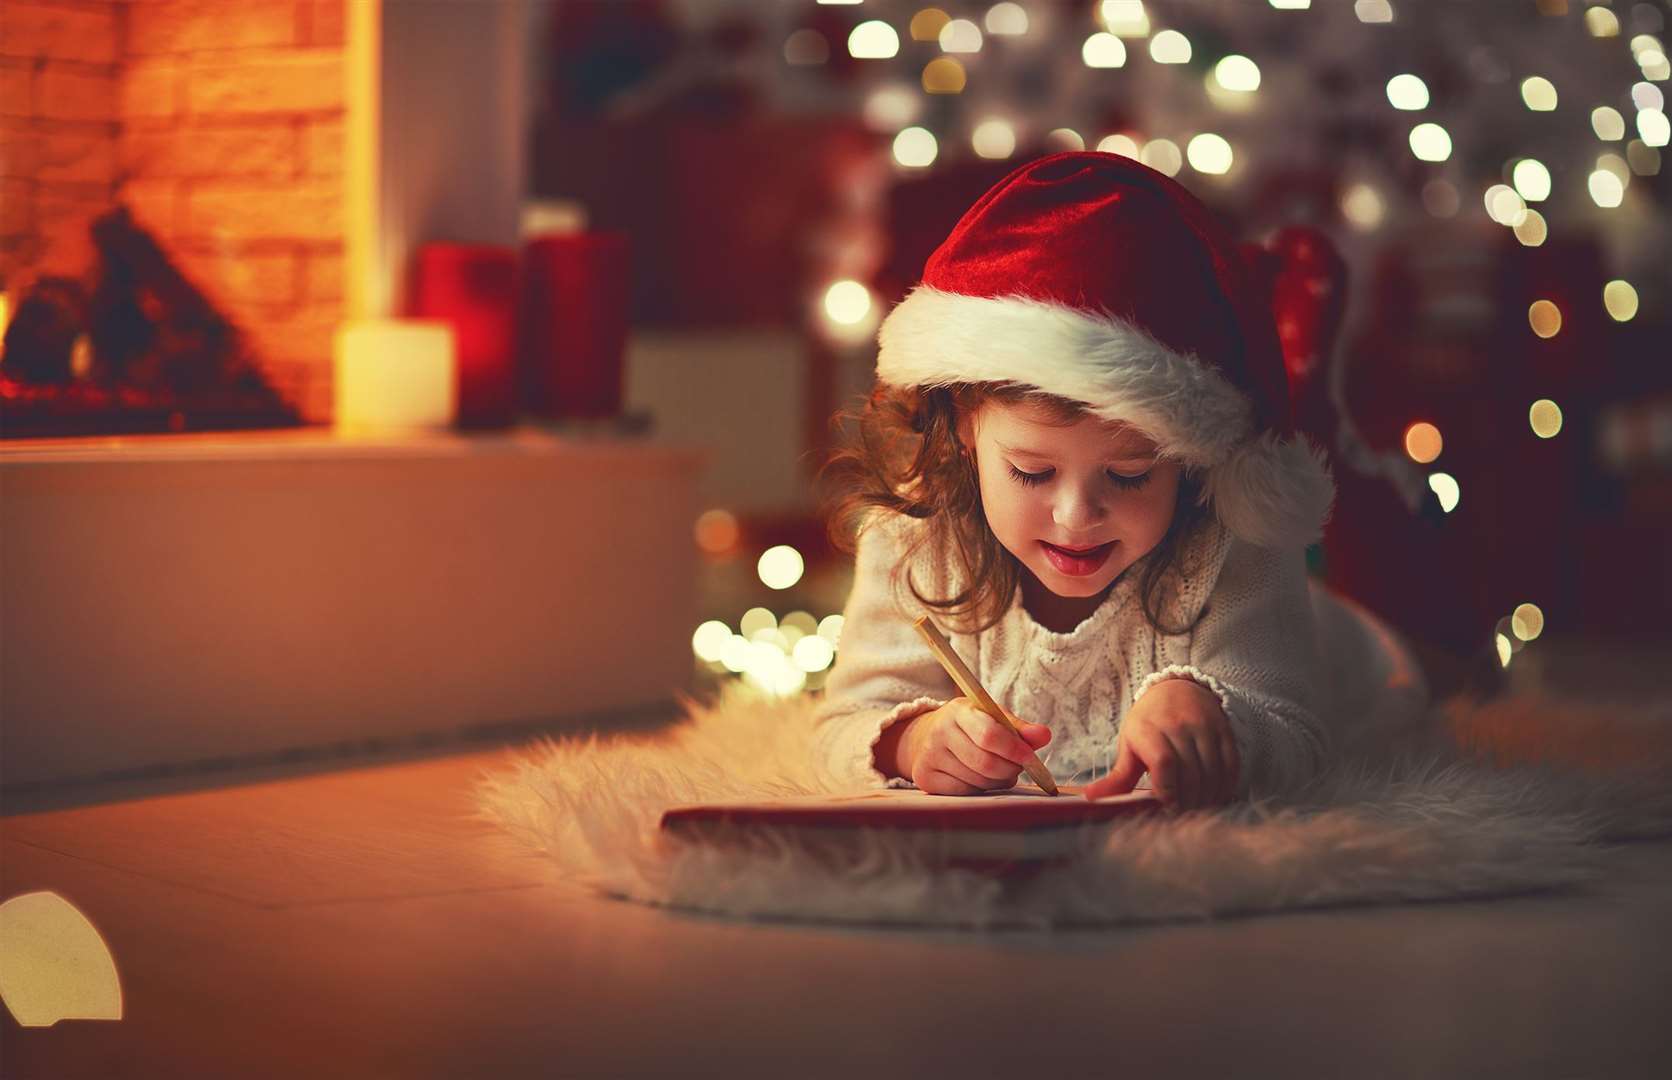 Children can write to Santa and receive a free reply if they include their full name and address. Image: iStock.